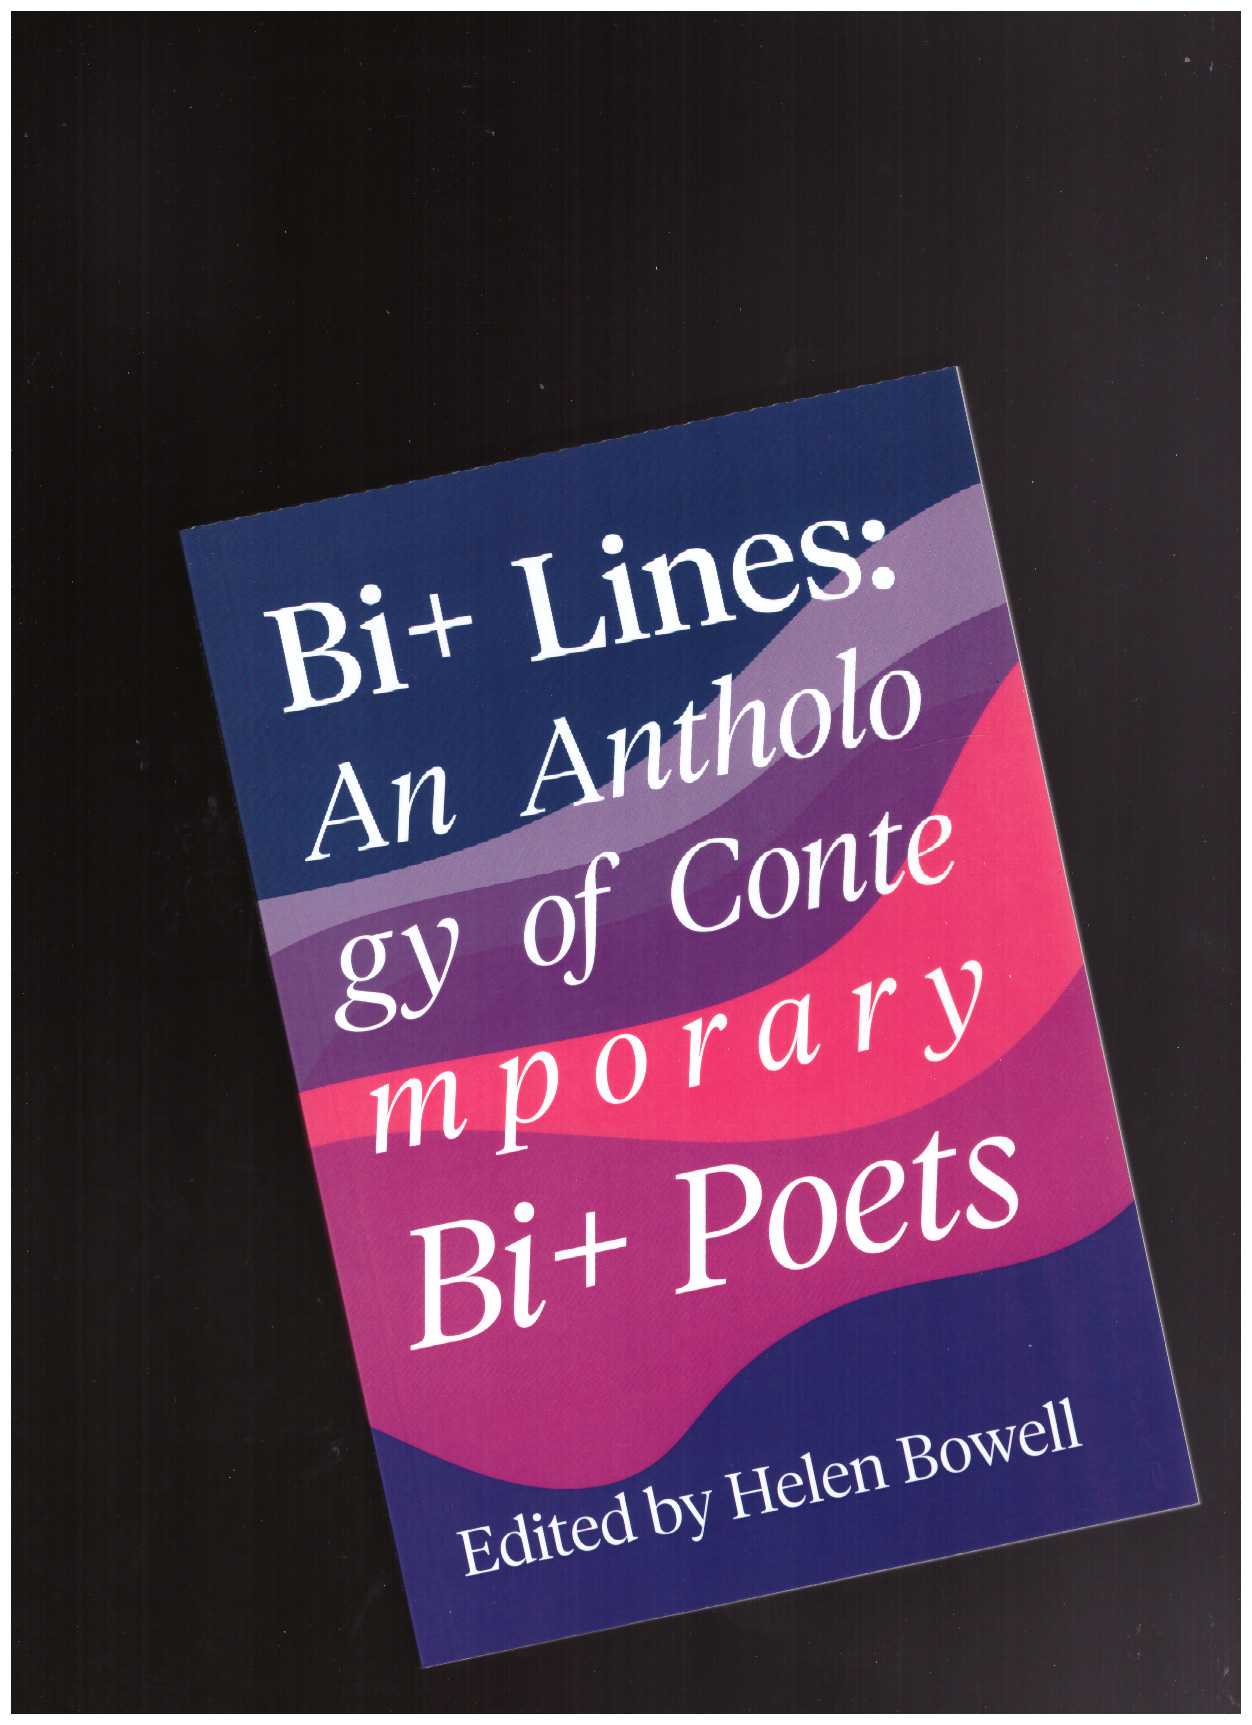 BOWELL, Helen (ed.) - Bi+ Lines: An Anthology of Contemporary Bi+ Poems